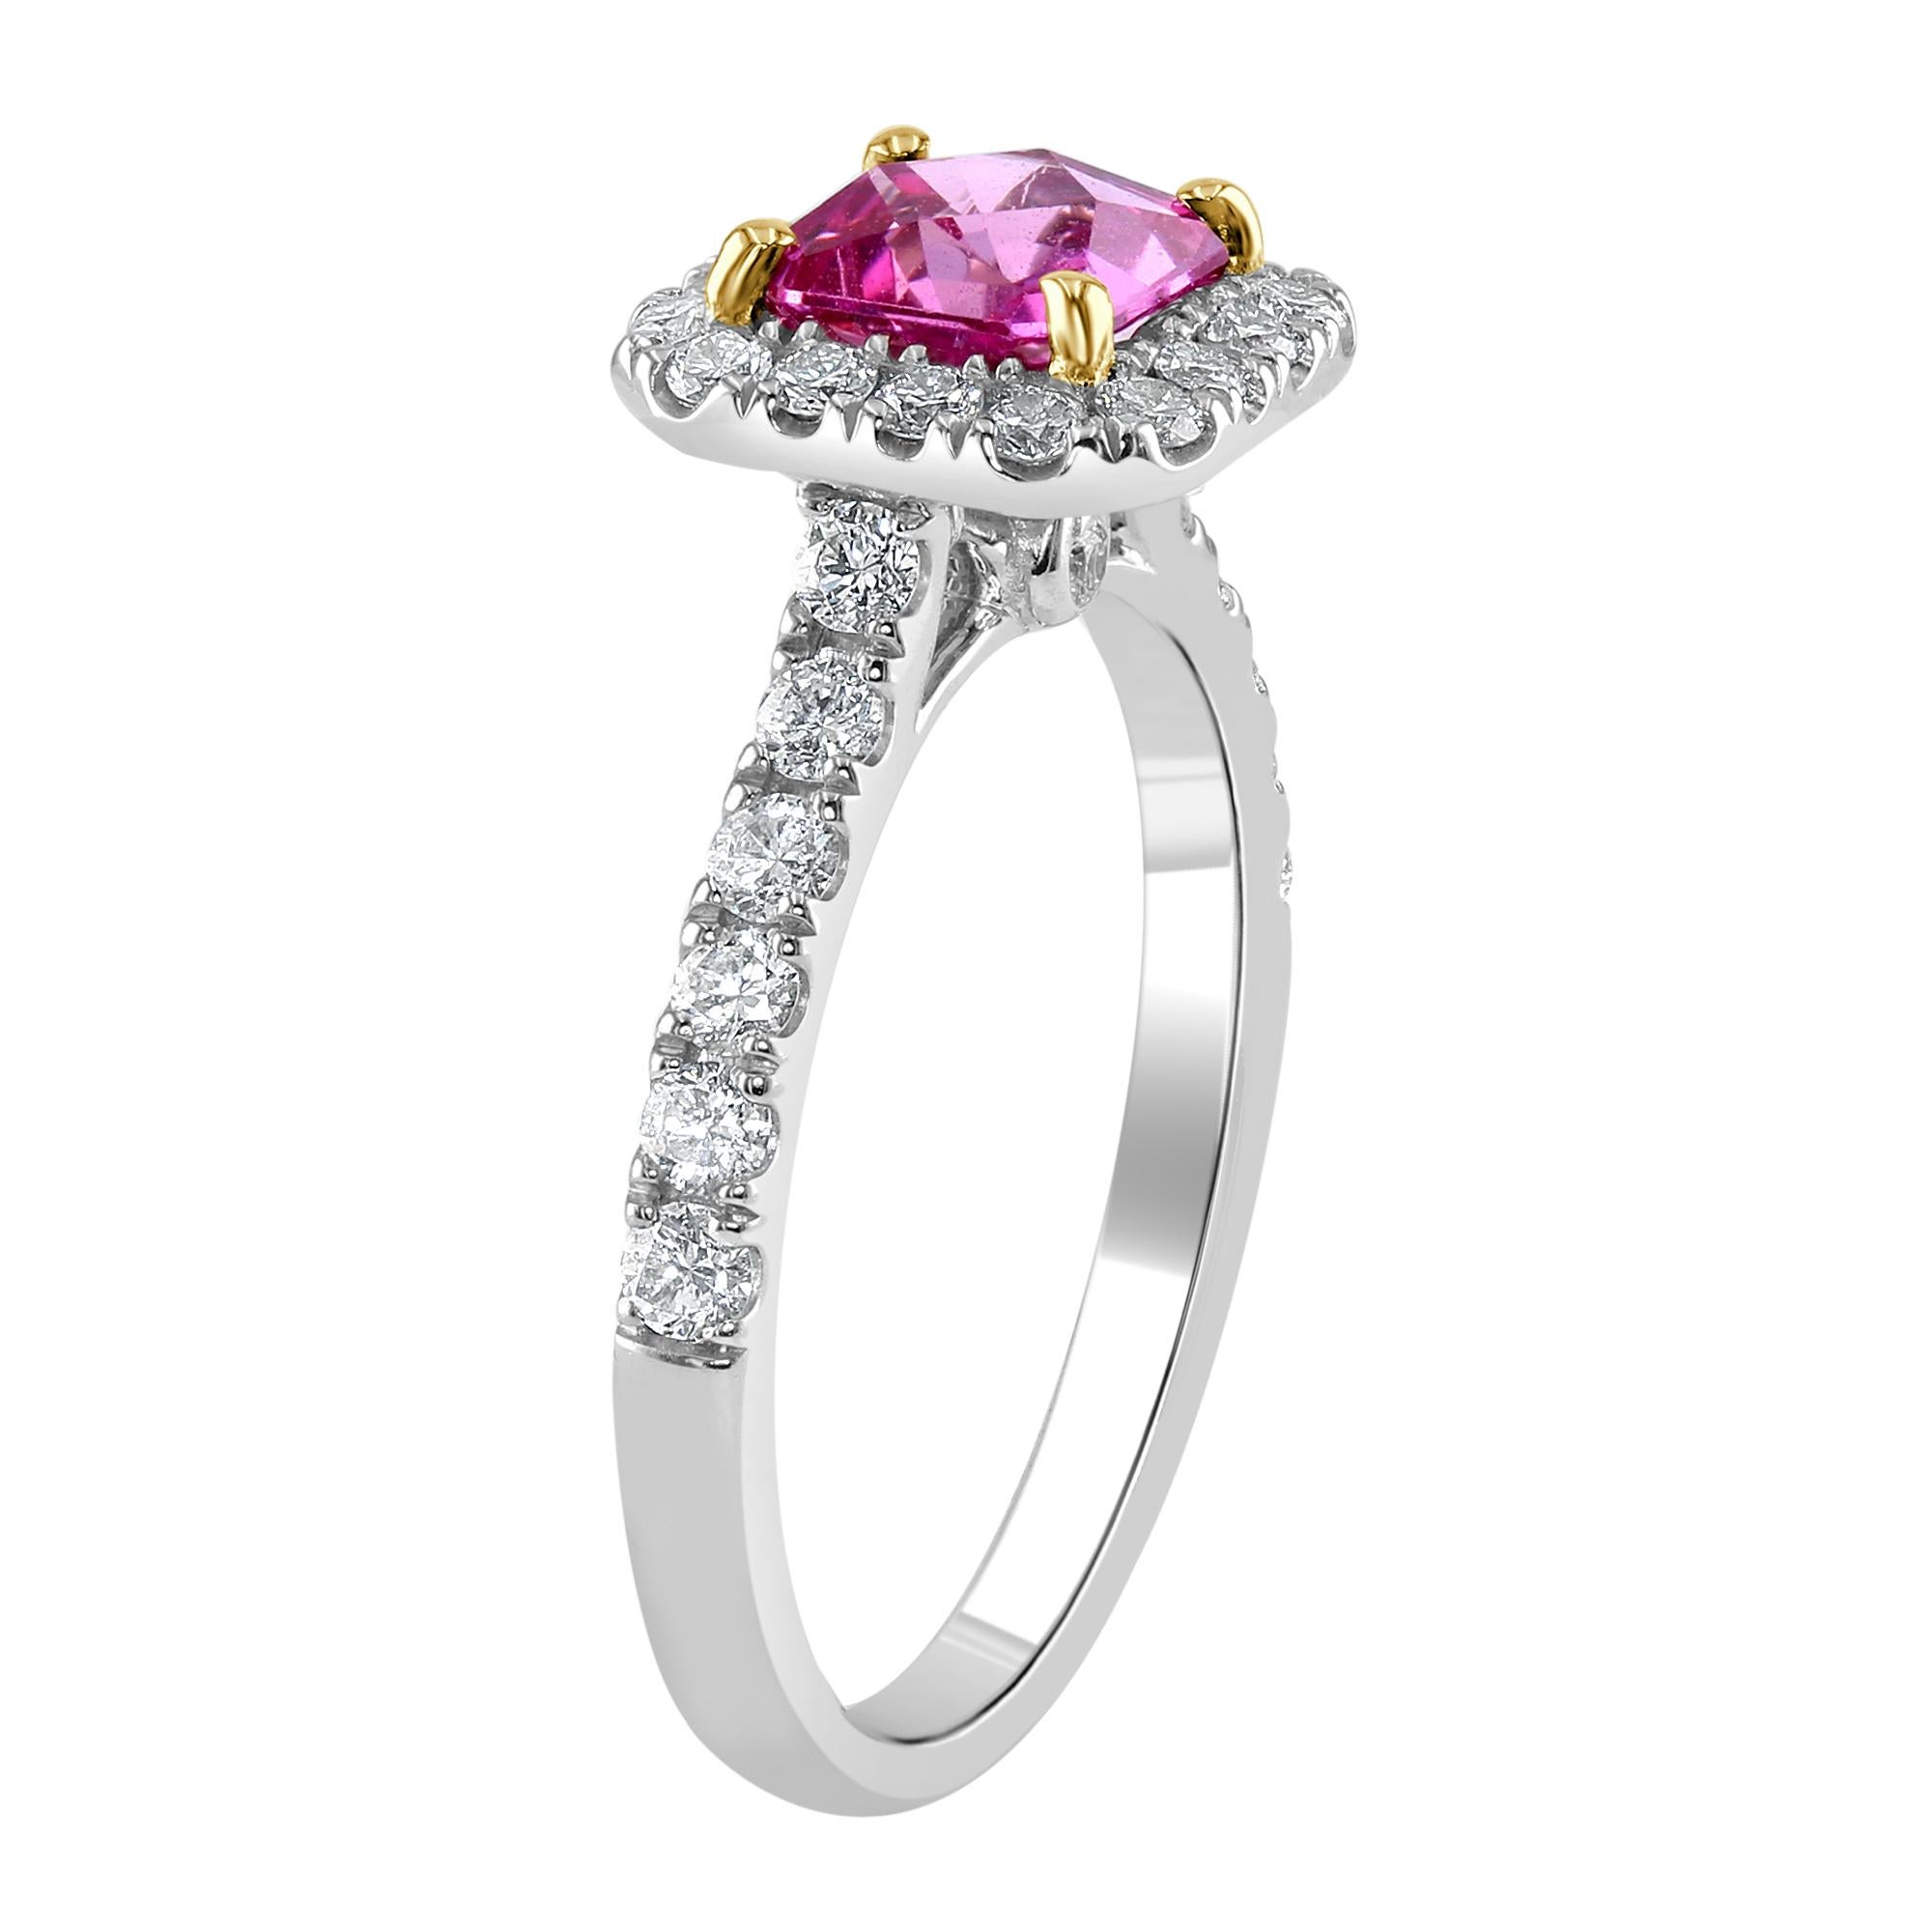 1.23 carat Emerald cut Pink Sapphire, surrounded by 0.66 carat round diamonds.

Set in 18K White Gold, with Yellow Gold Prongs

If you are looking for a classy, feminine and elegant one-of-a-kind engagement ring, this is the perfect piece to make